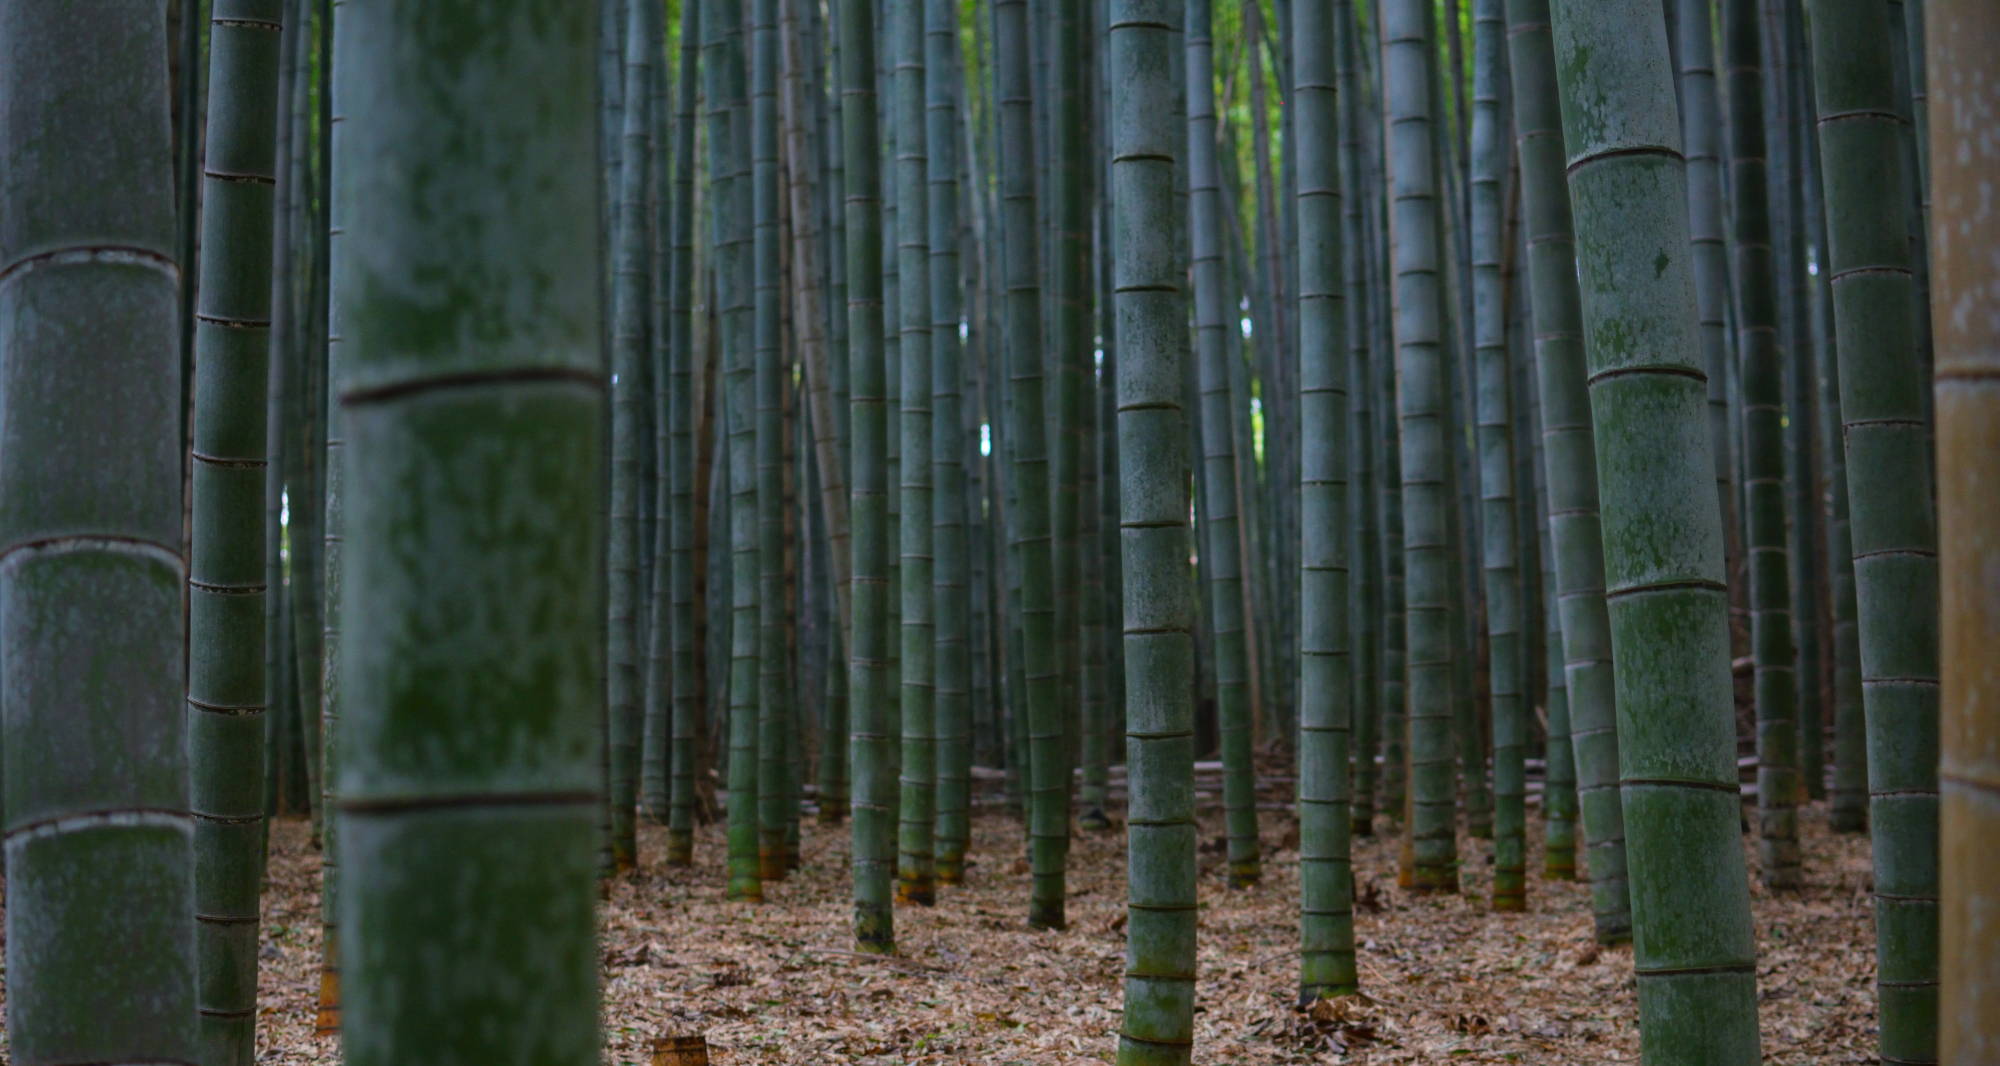 A bamboo forest grows out of a flat ground scattered with brown debris and old bamboo leaves.